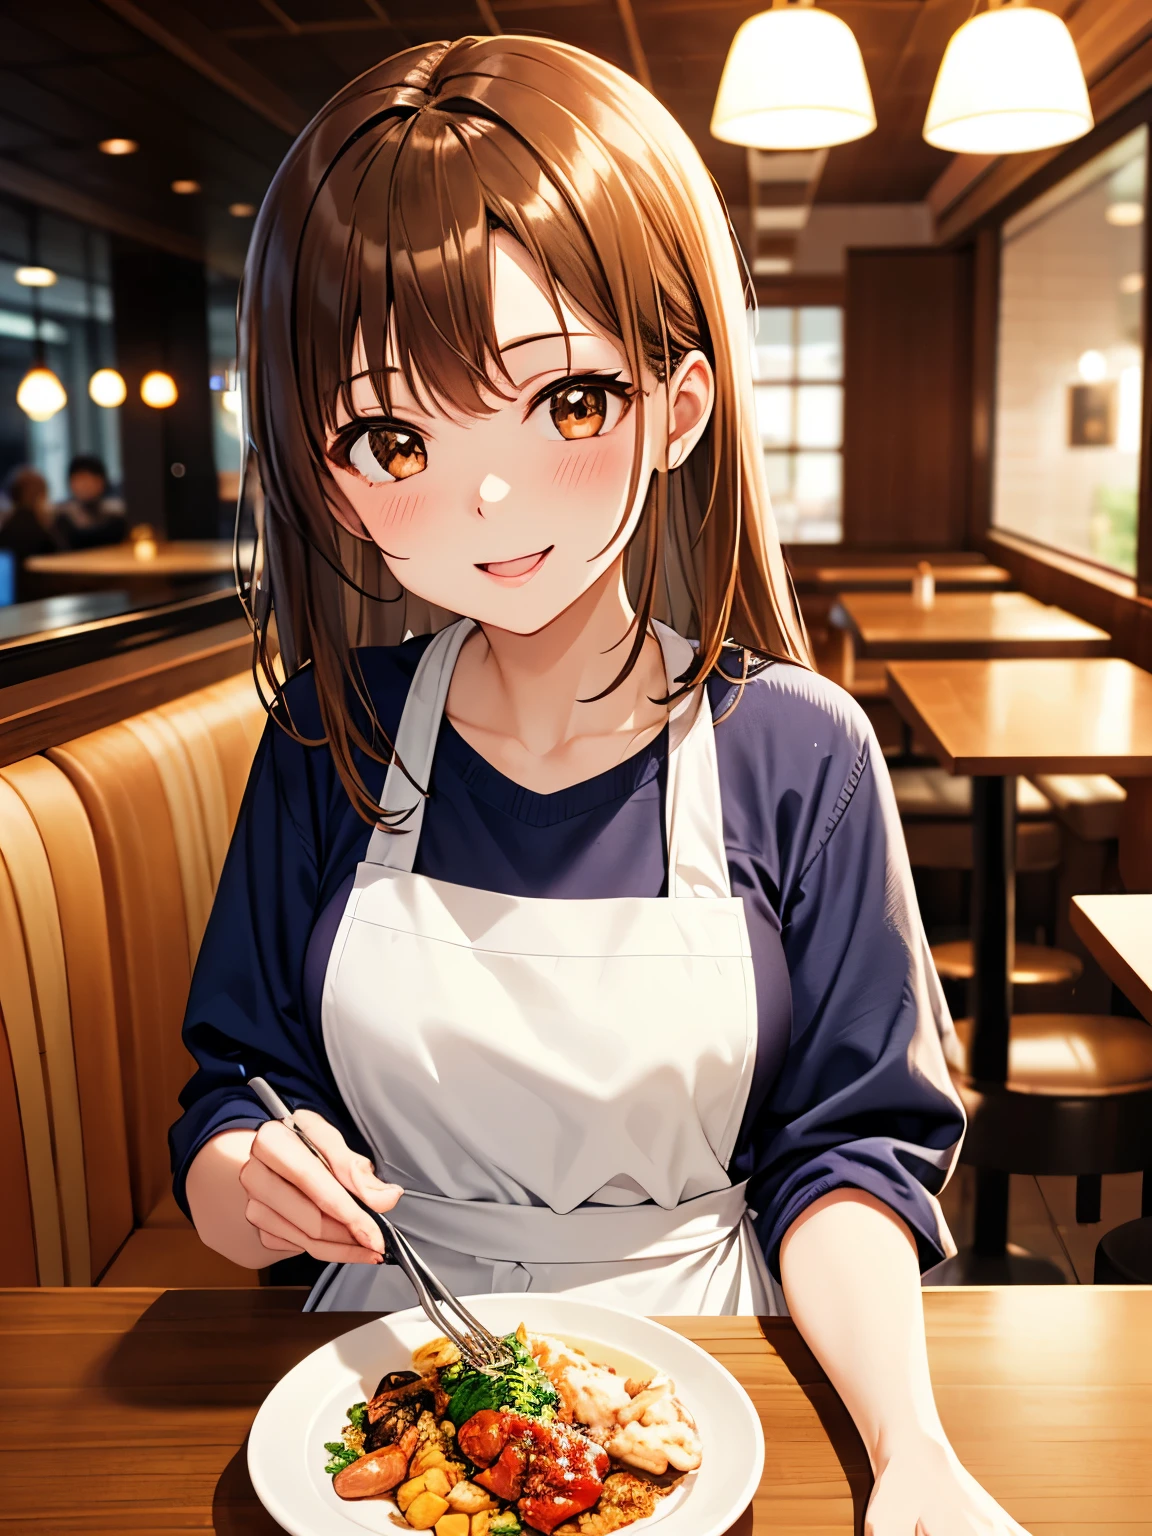 woman portrait ,20 years,Upper body,Jeans、apron、シロ色shirt、Ｔshirt、sweater　clothes,restaurant,cinematic lighting,brown eyes、smile、blush、beautiful tidy hair、straight、apron、apron、brown crab